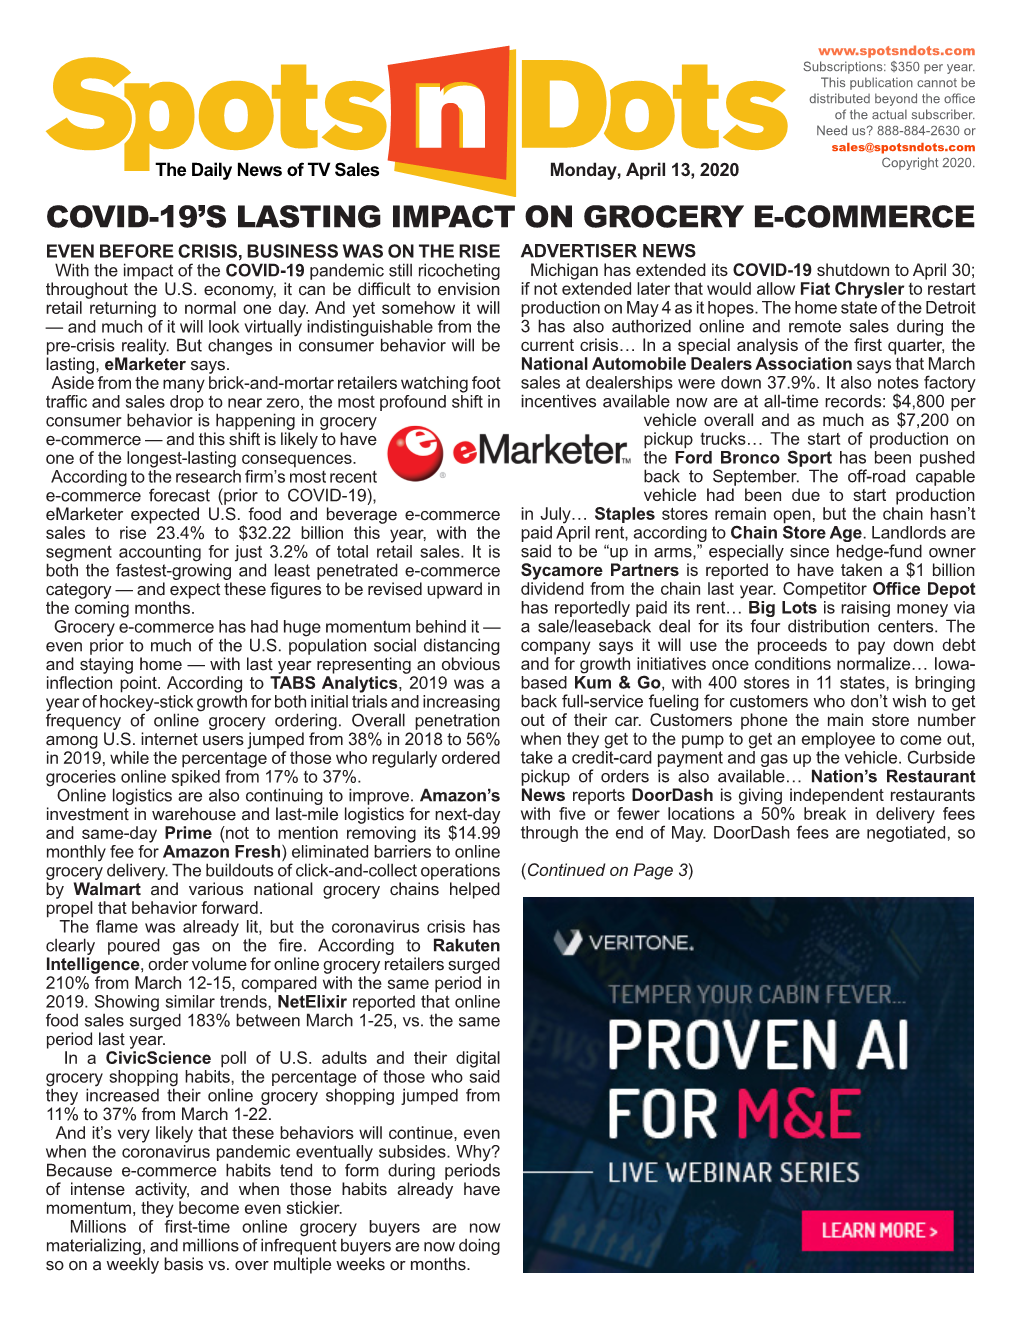 Covid-19'S Lasting Impact on Grocery E-Commerce